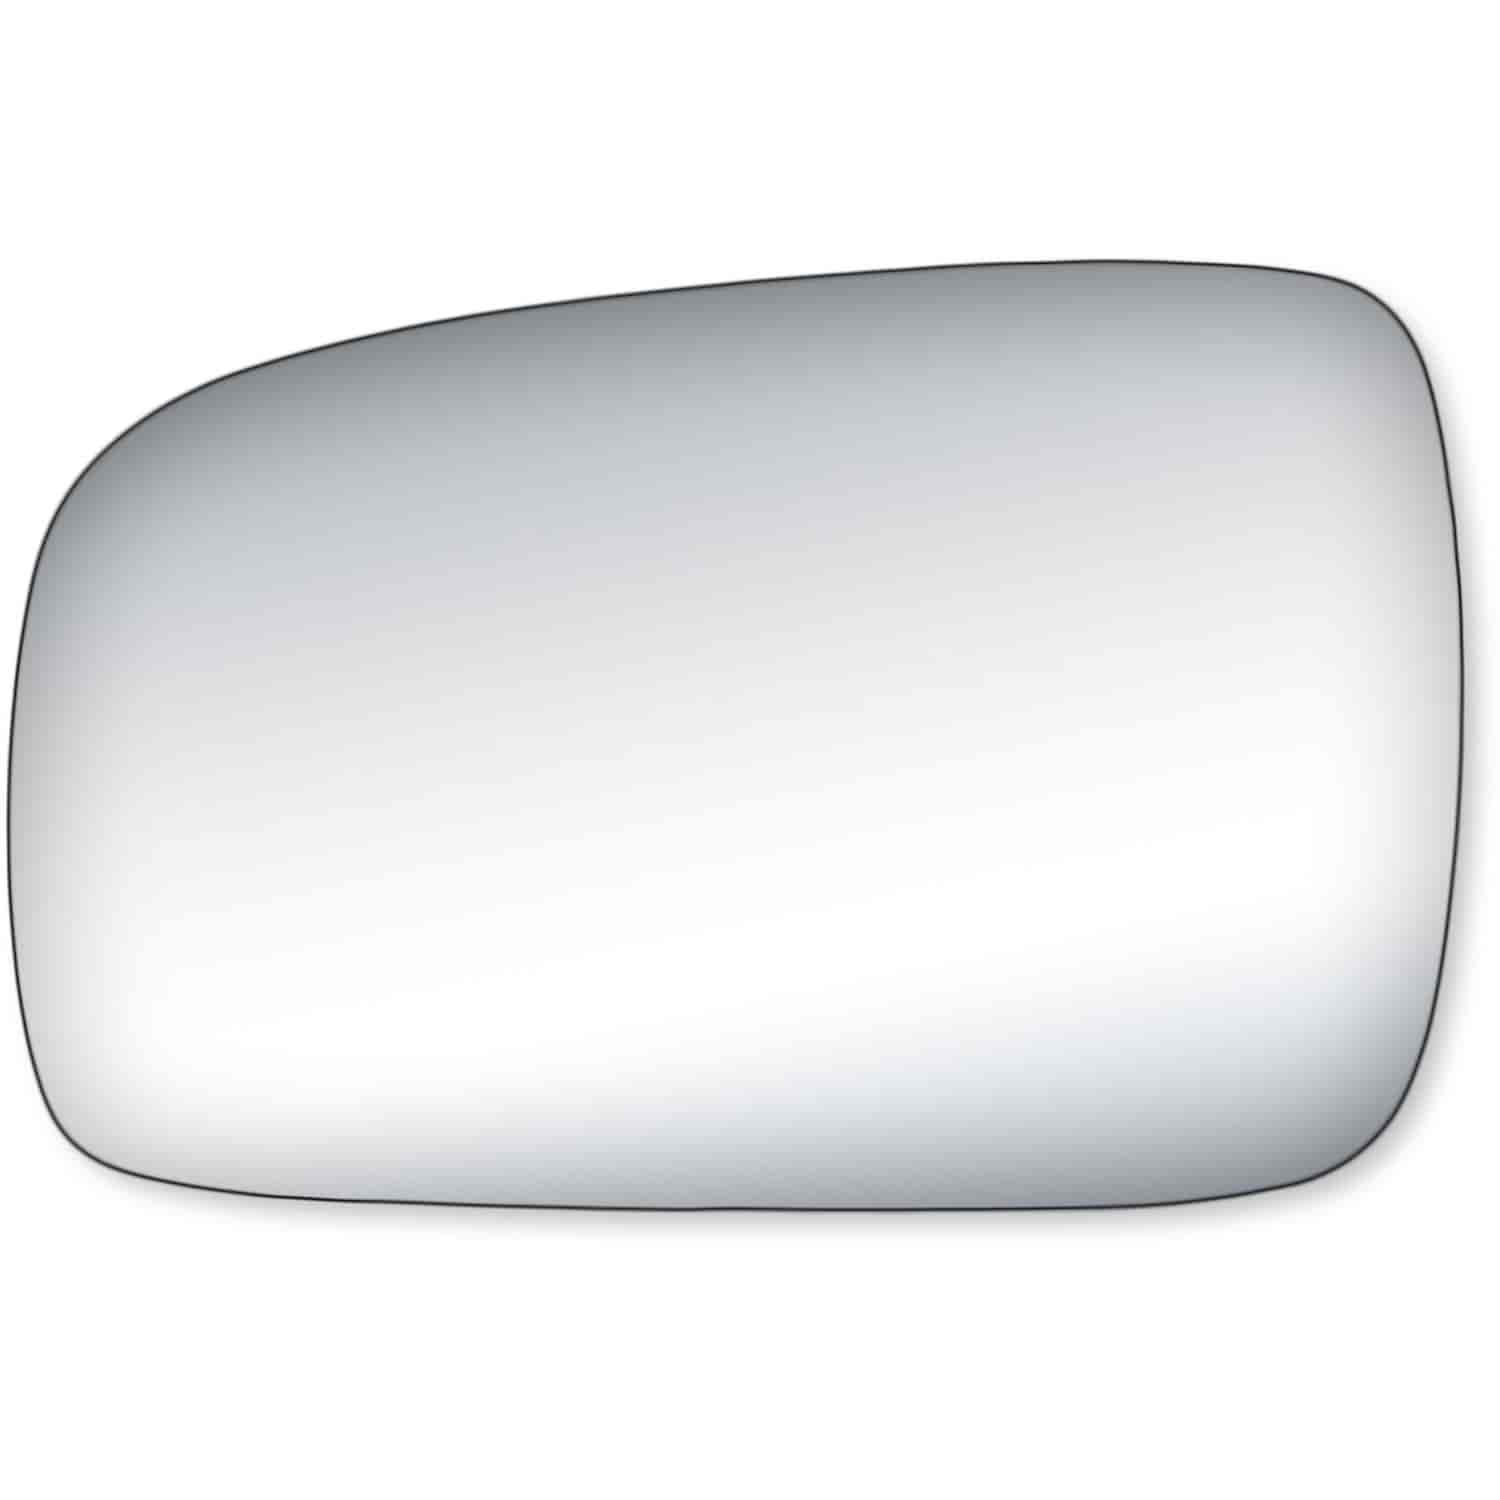 Replacement Glass for 03-09 Sorento the glass measures 4 5/8 tall by 7 3/16 wide and 7 3/4 diagonall